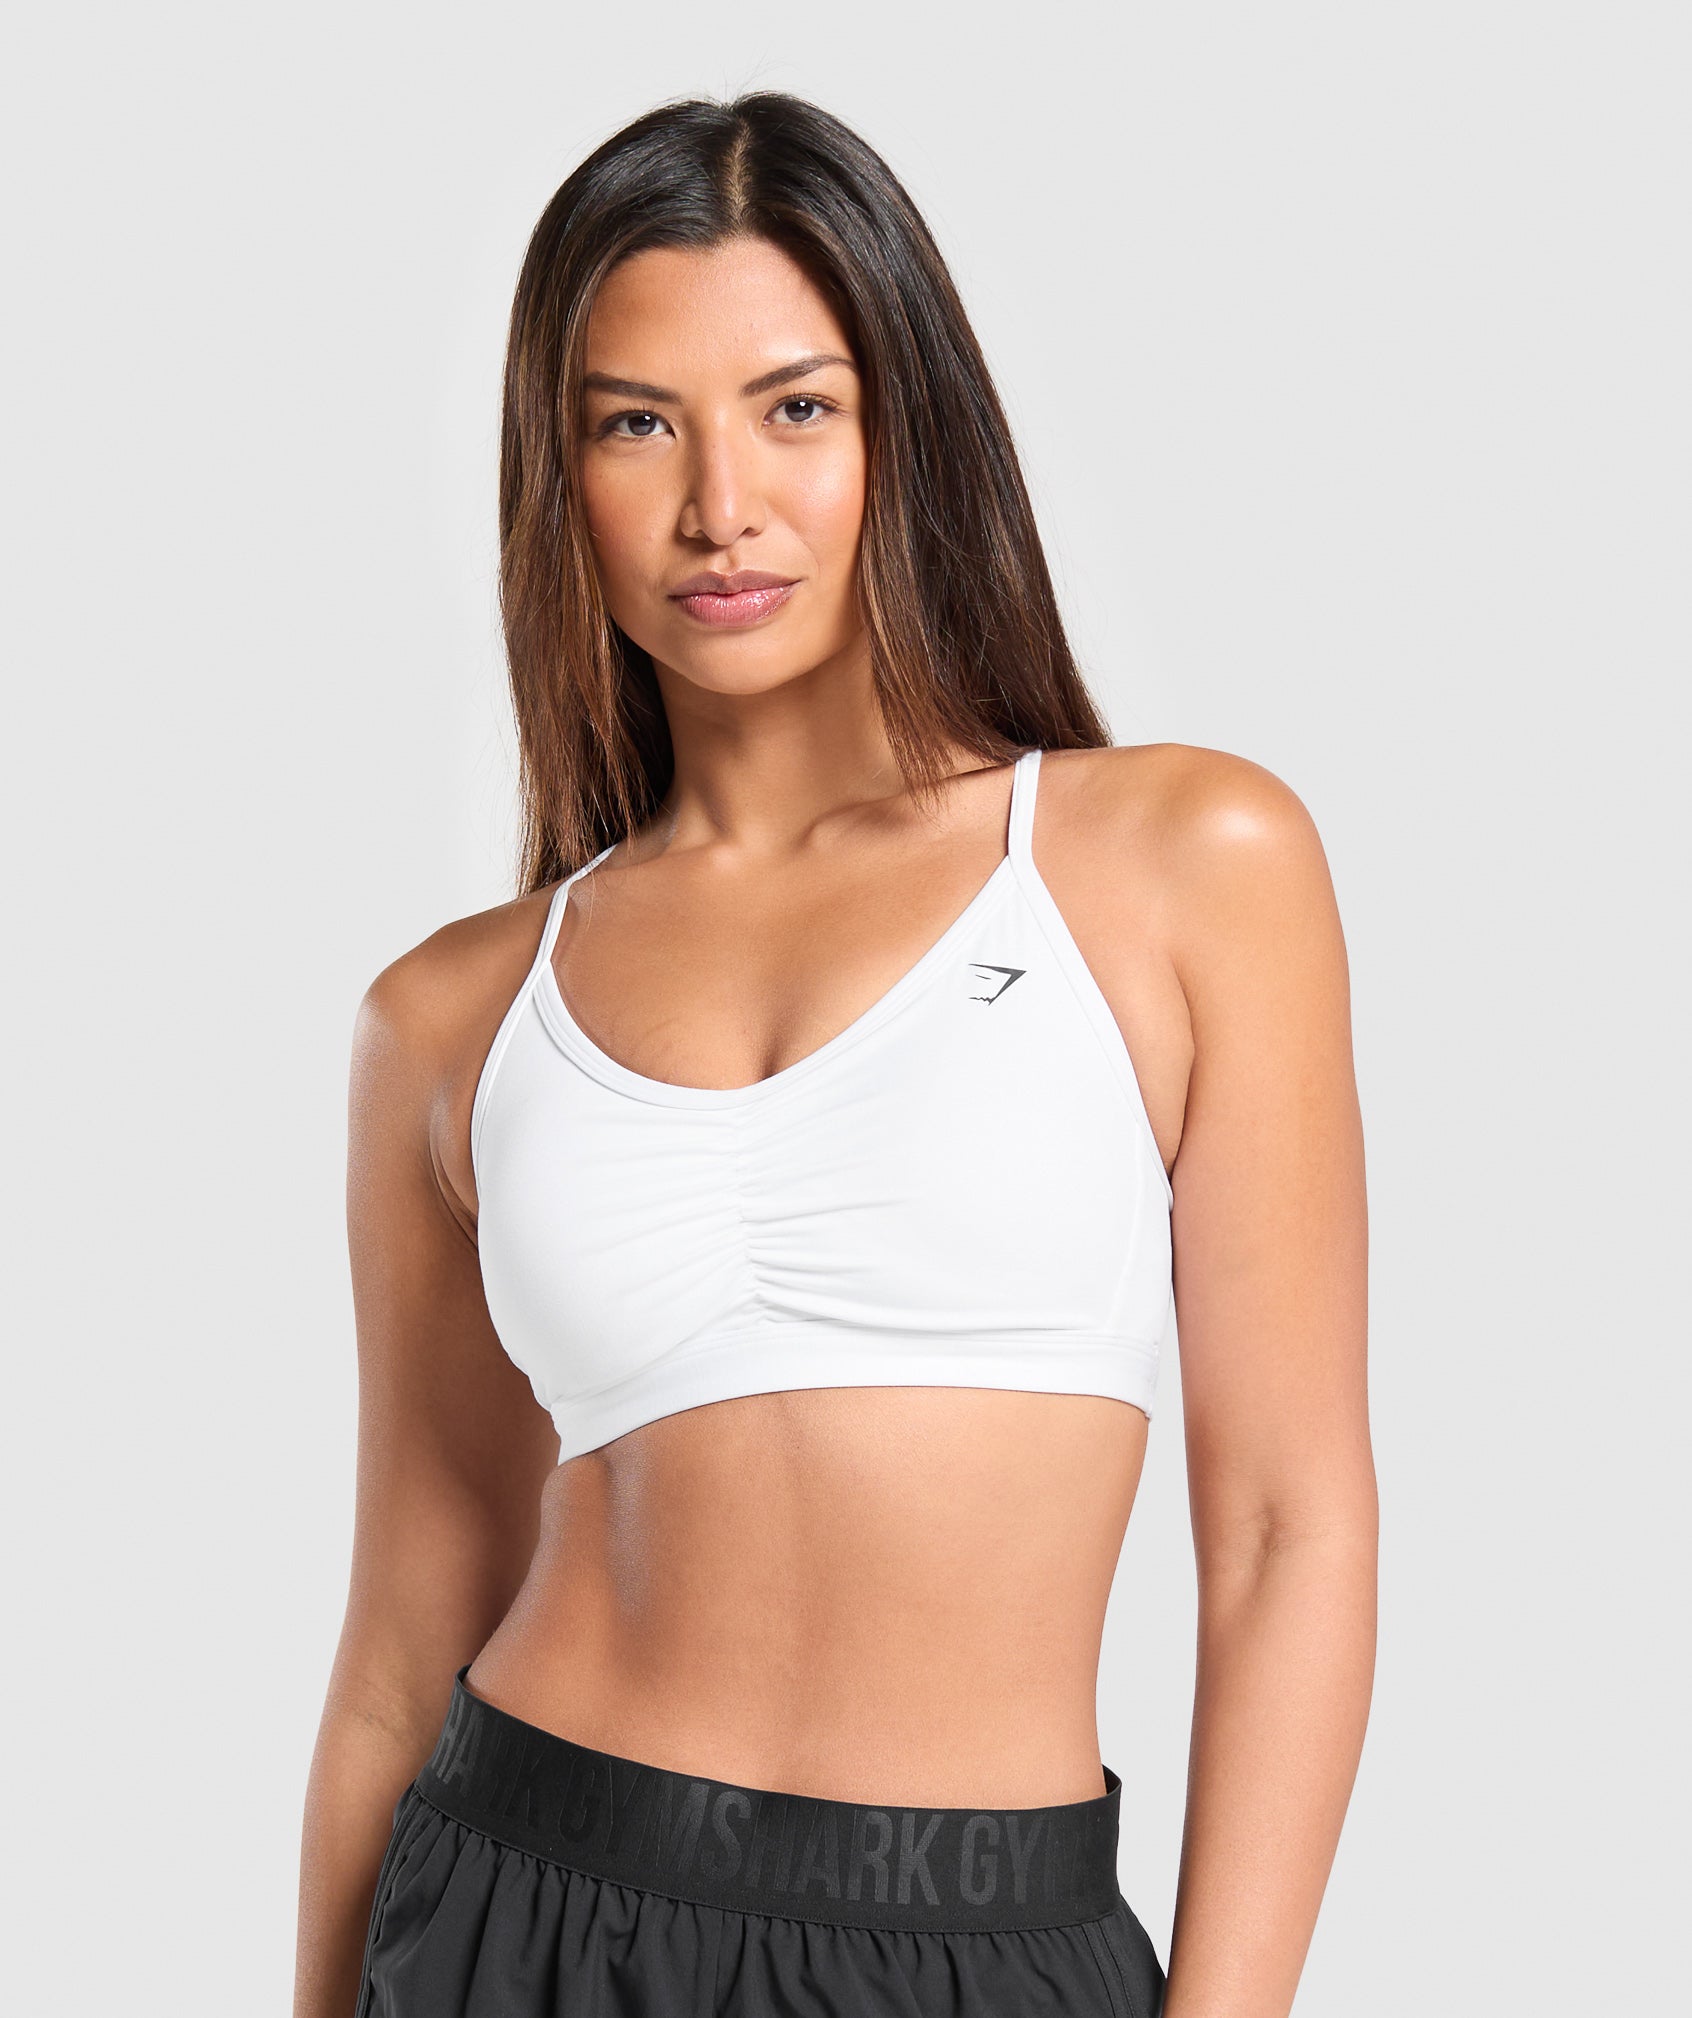 Ruched Training Sports Bra in White is out of stock